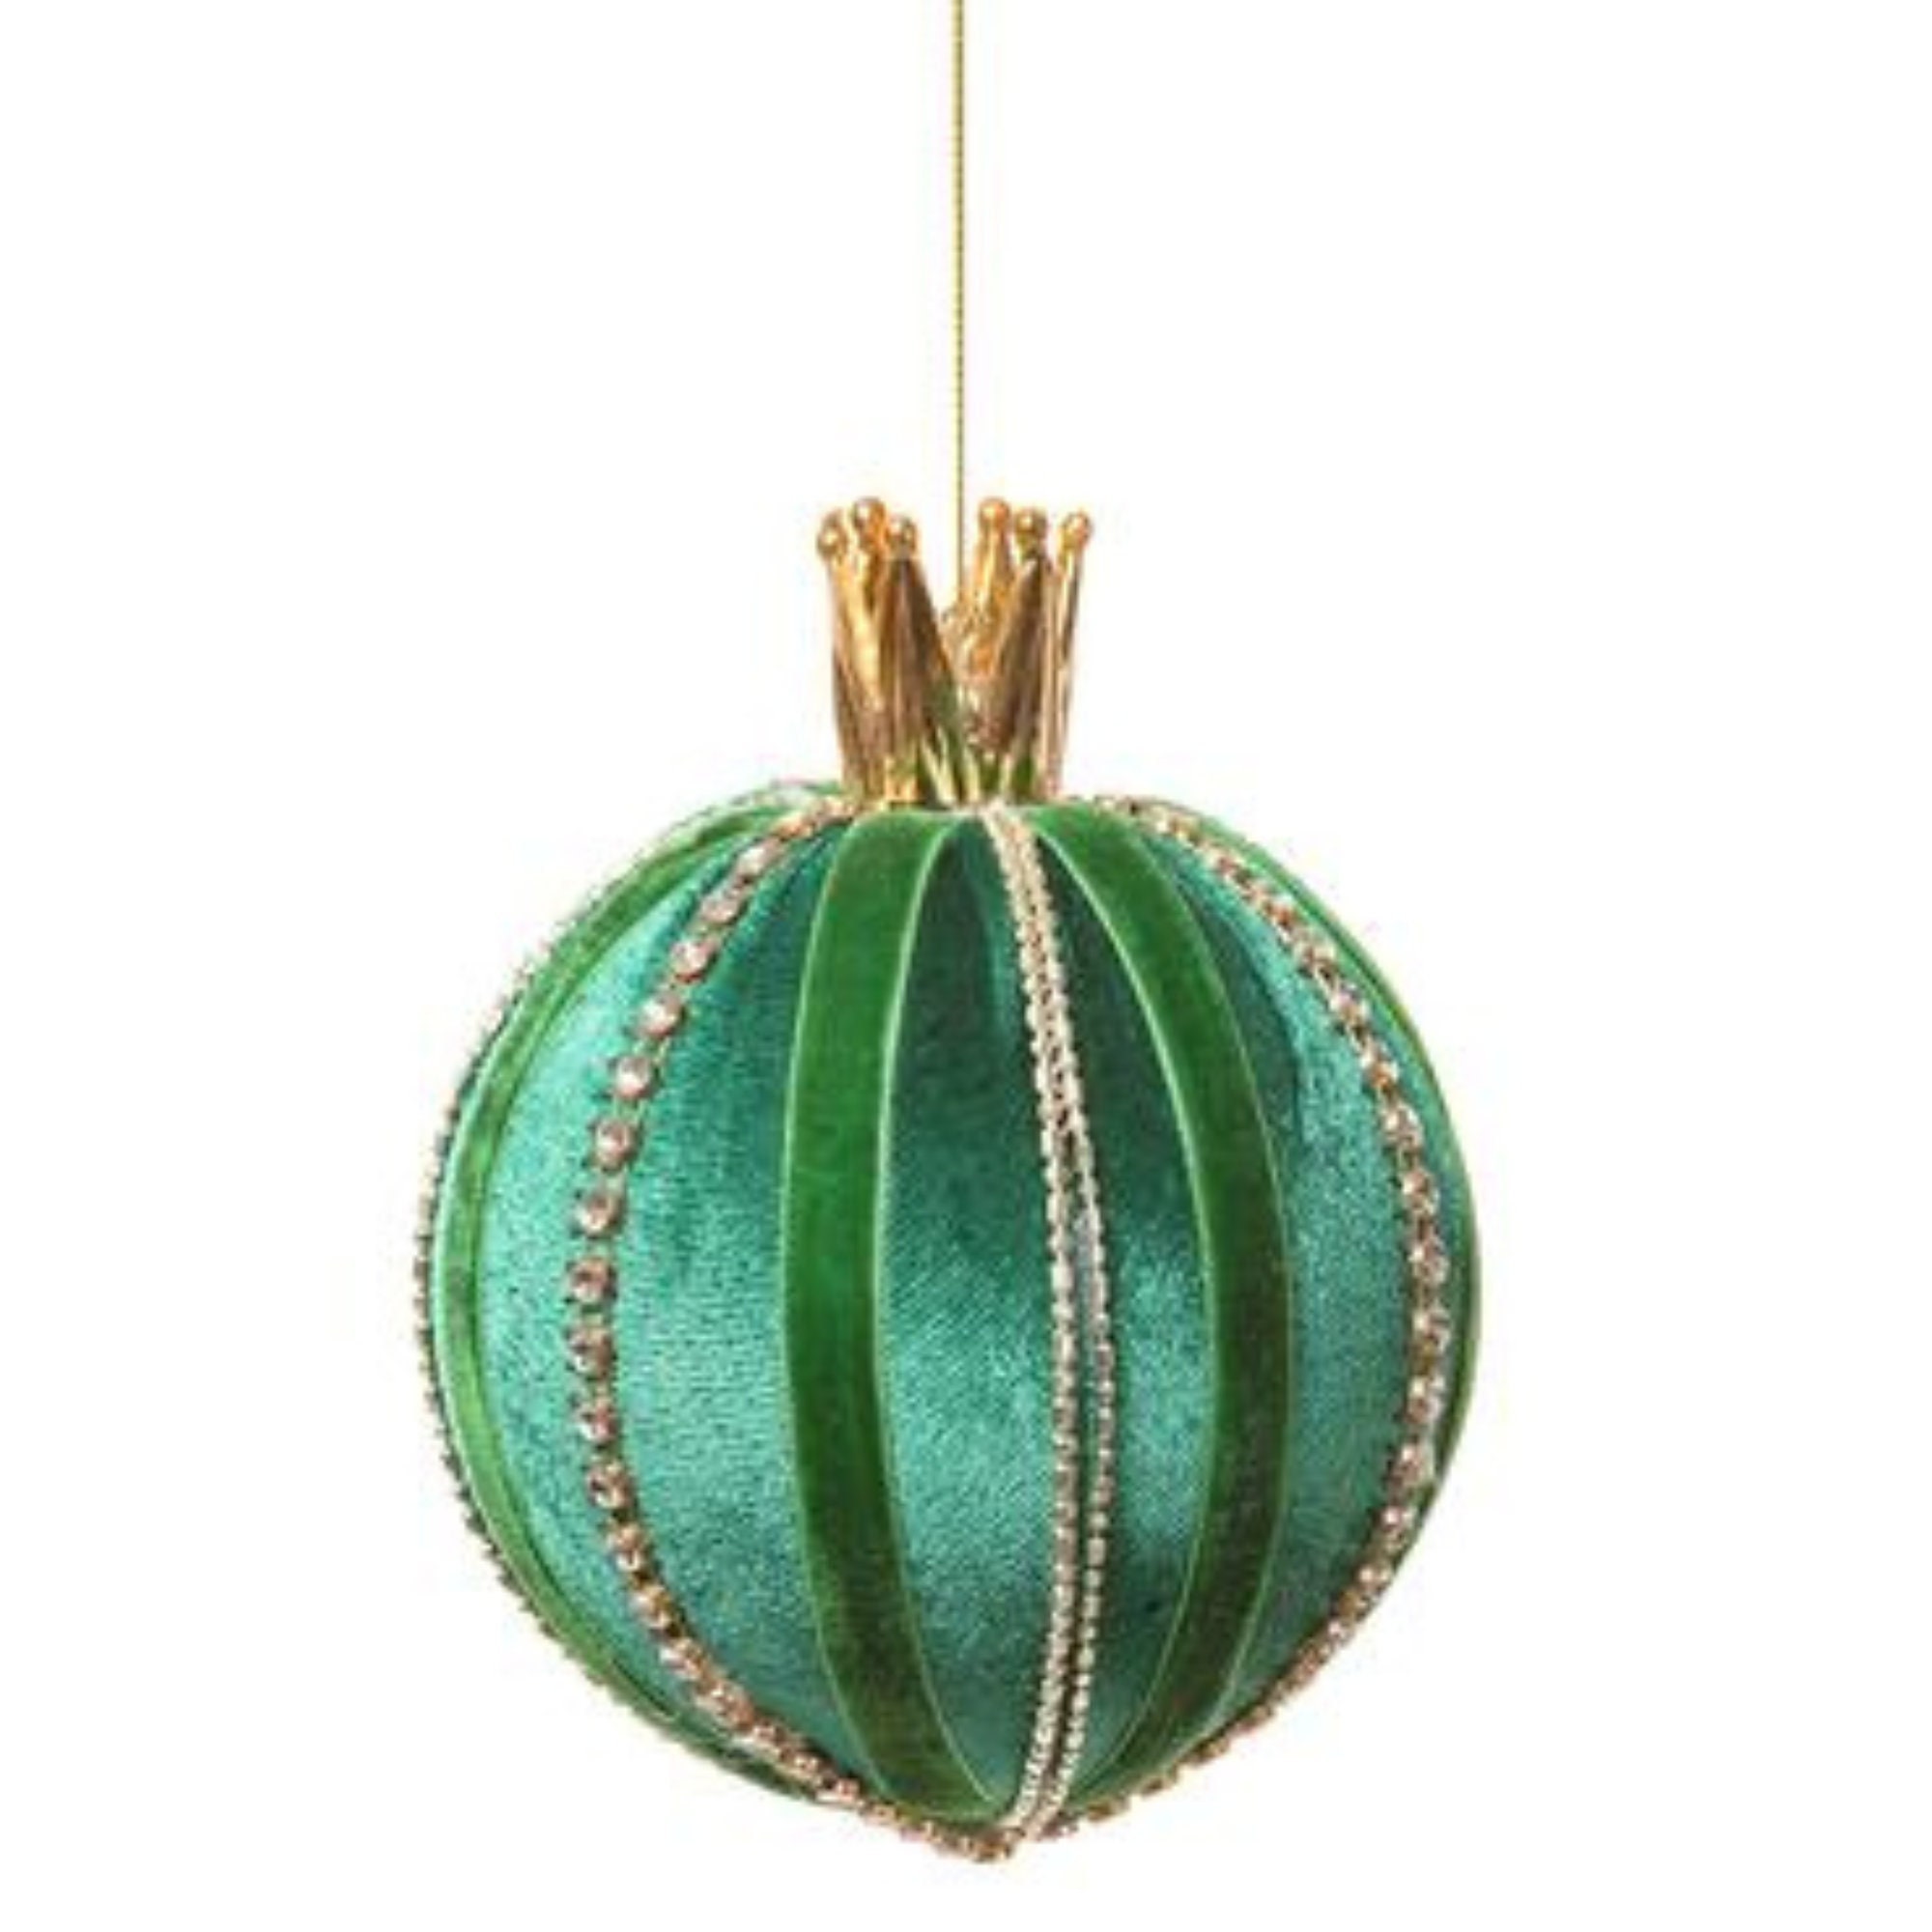 4 Green and Gold Velvet Ornament with Crown, Emerald Green